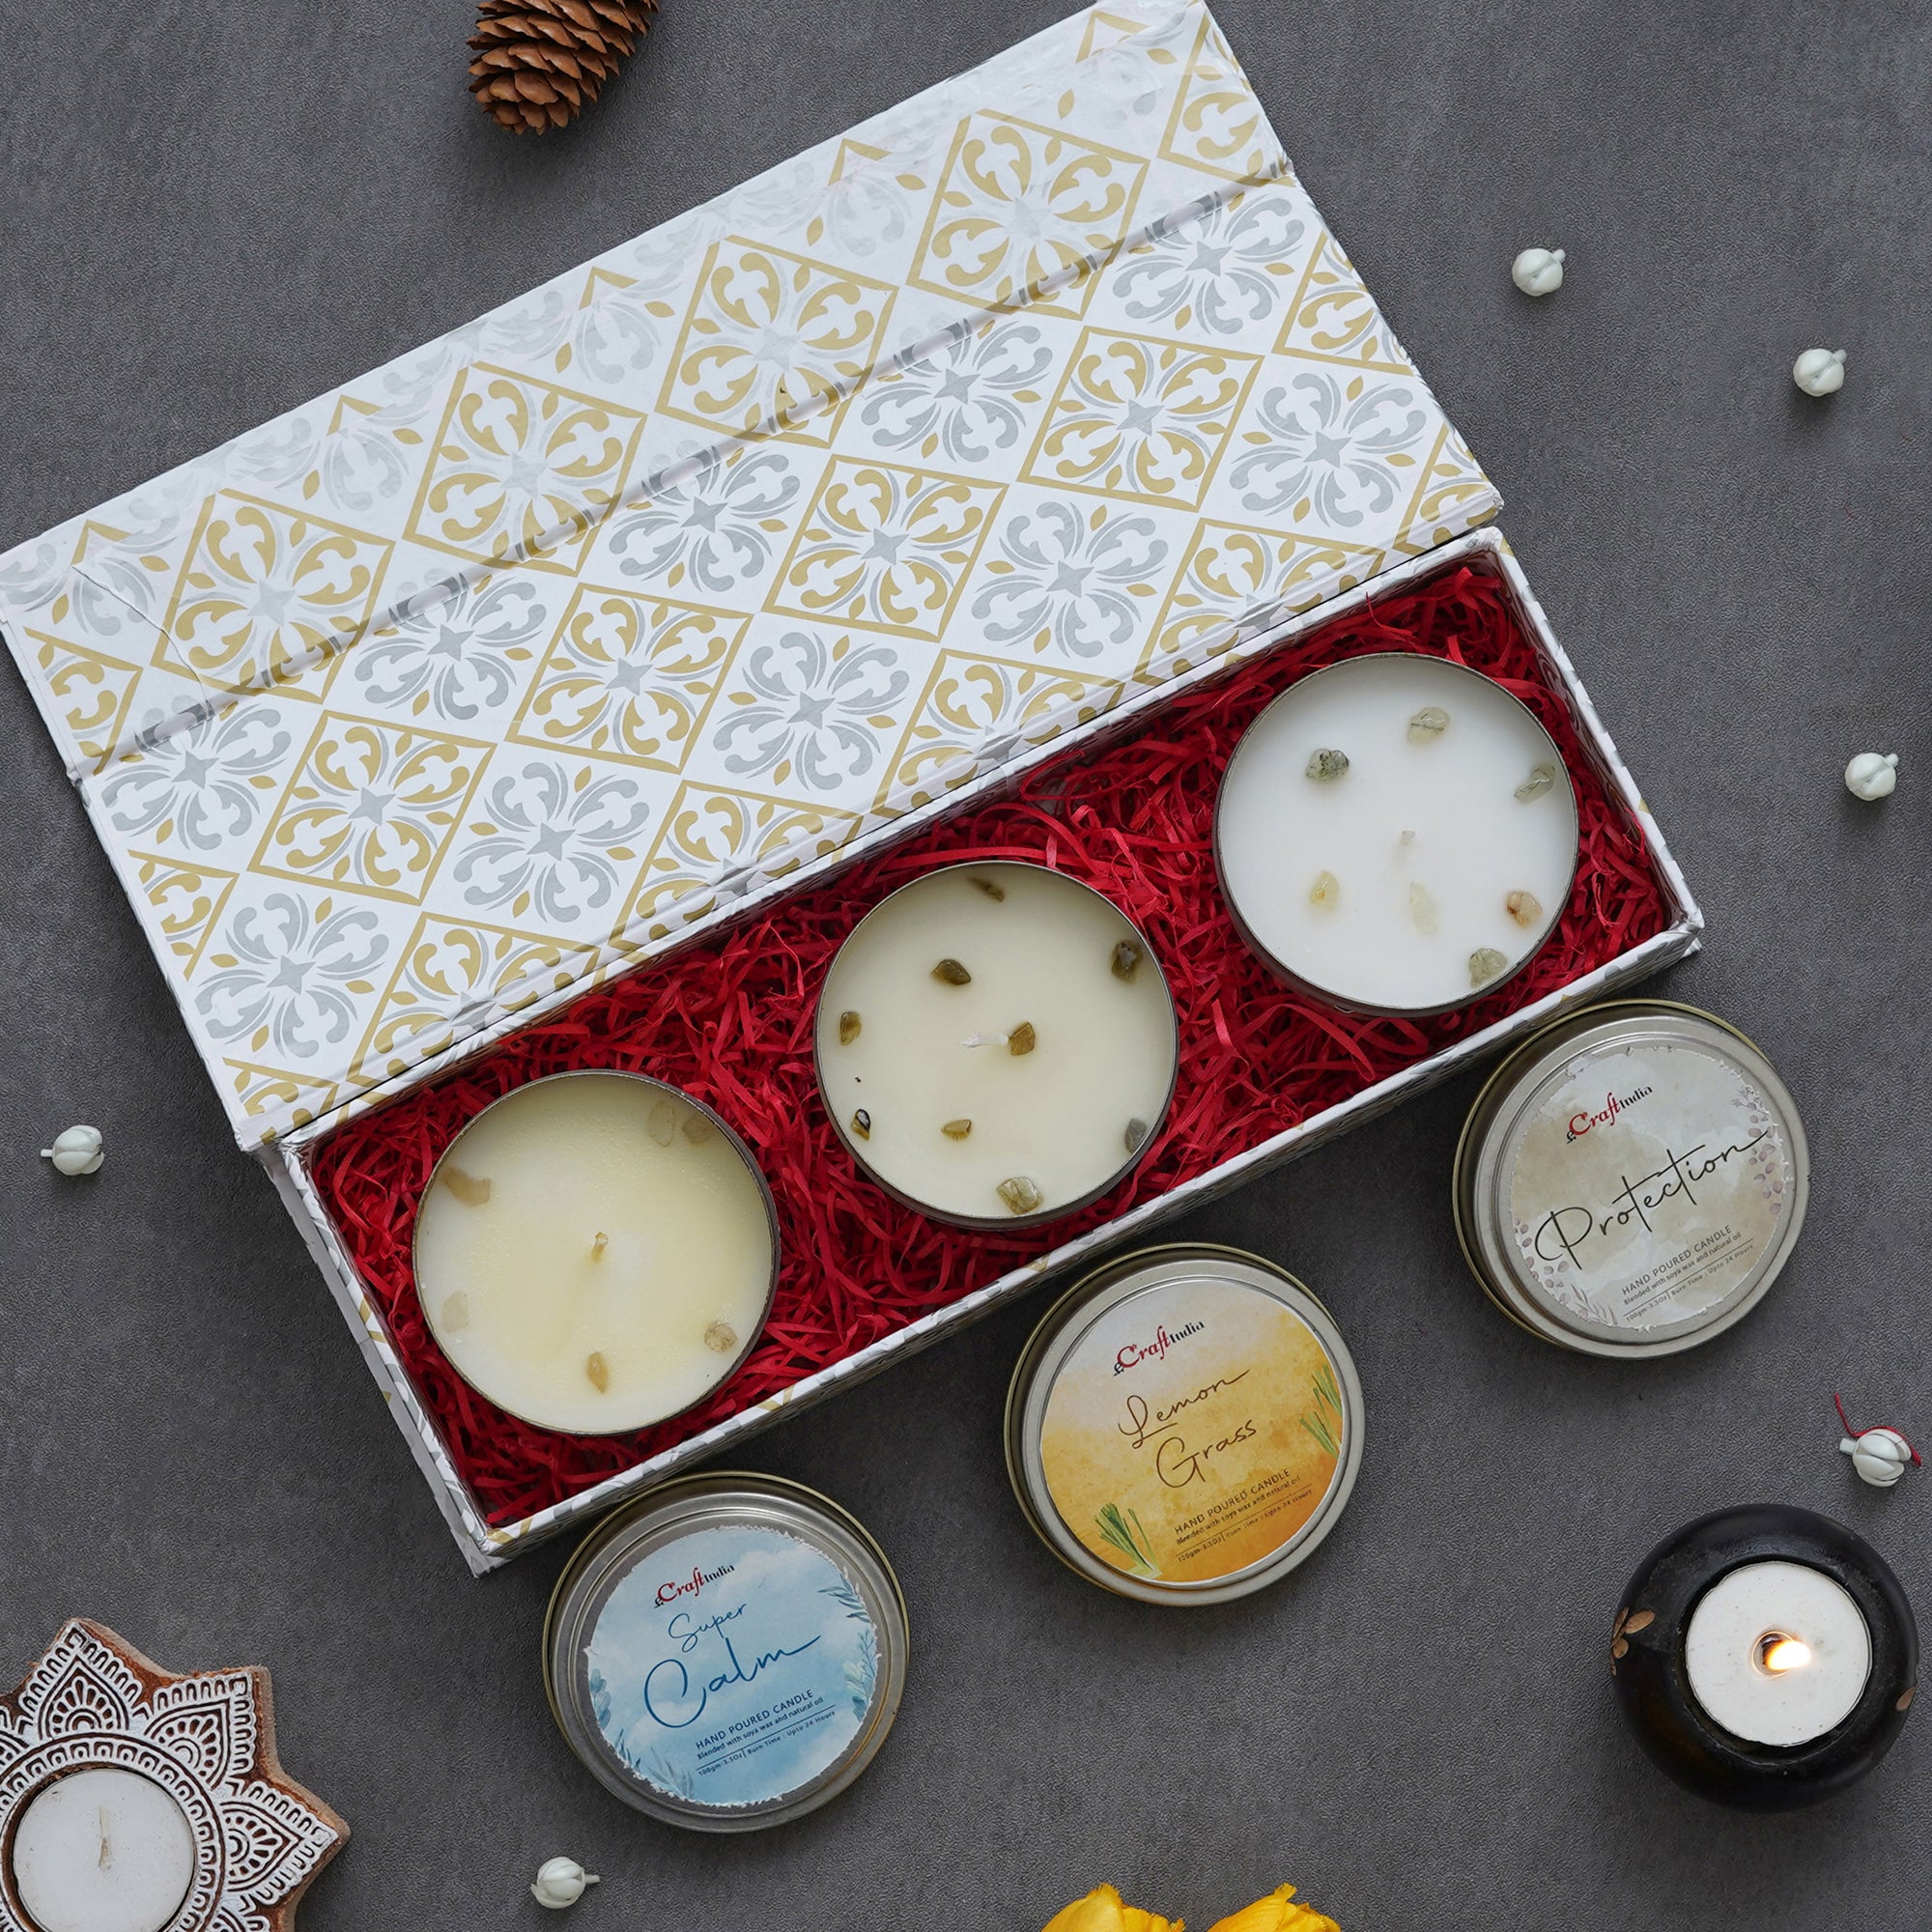 eCraftIndia The Scented Gift Box - Set of 3 Jars Super Calm, Lemon Grass, Protection Hand Poured Soya Wax Candles 1